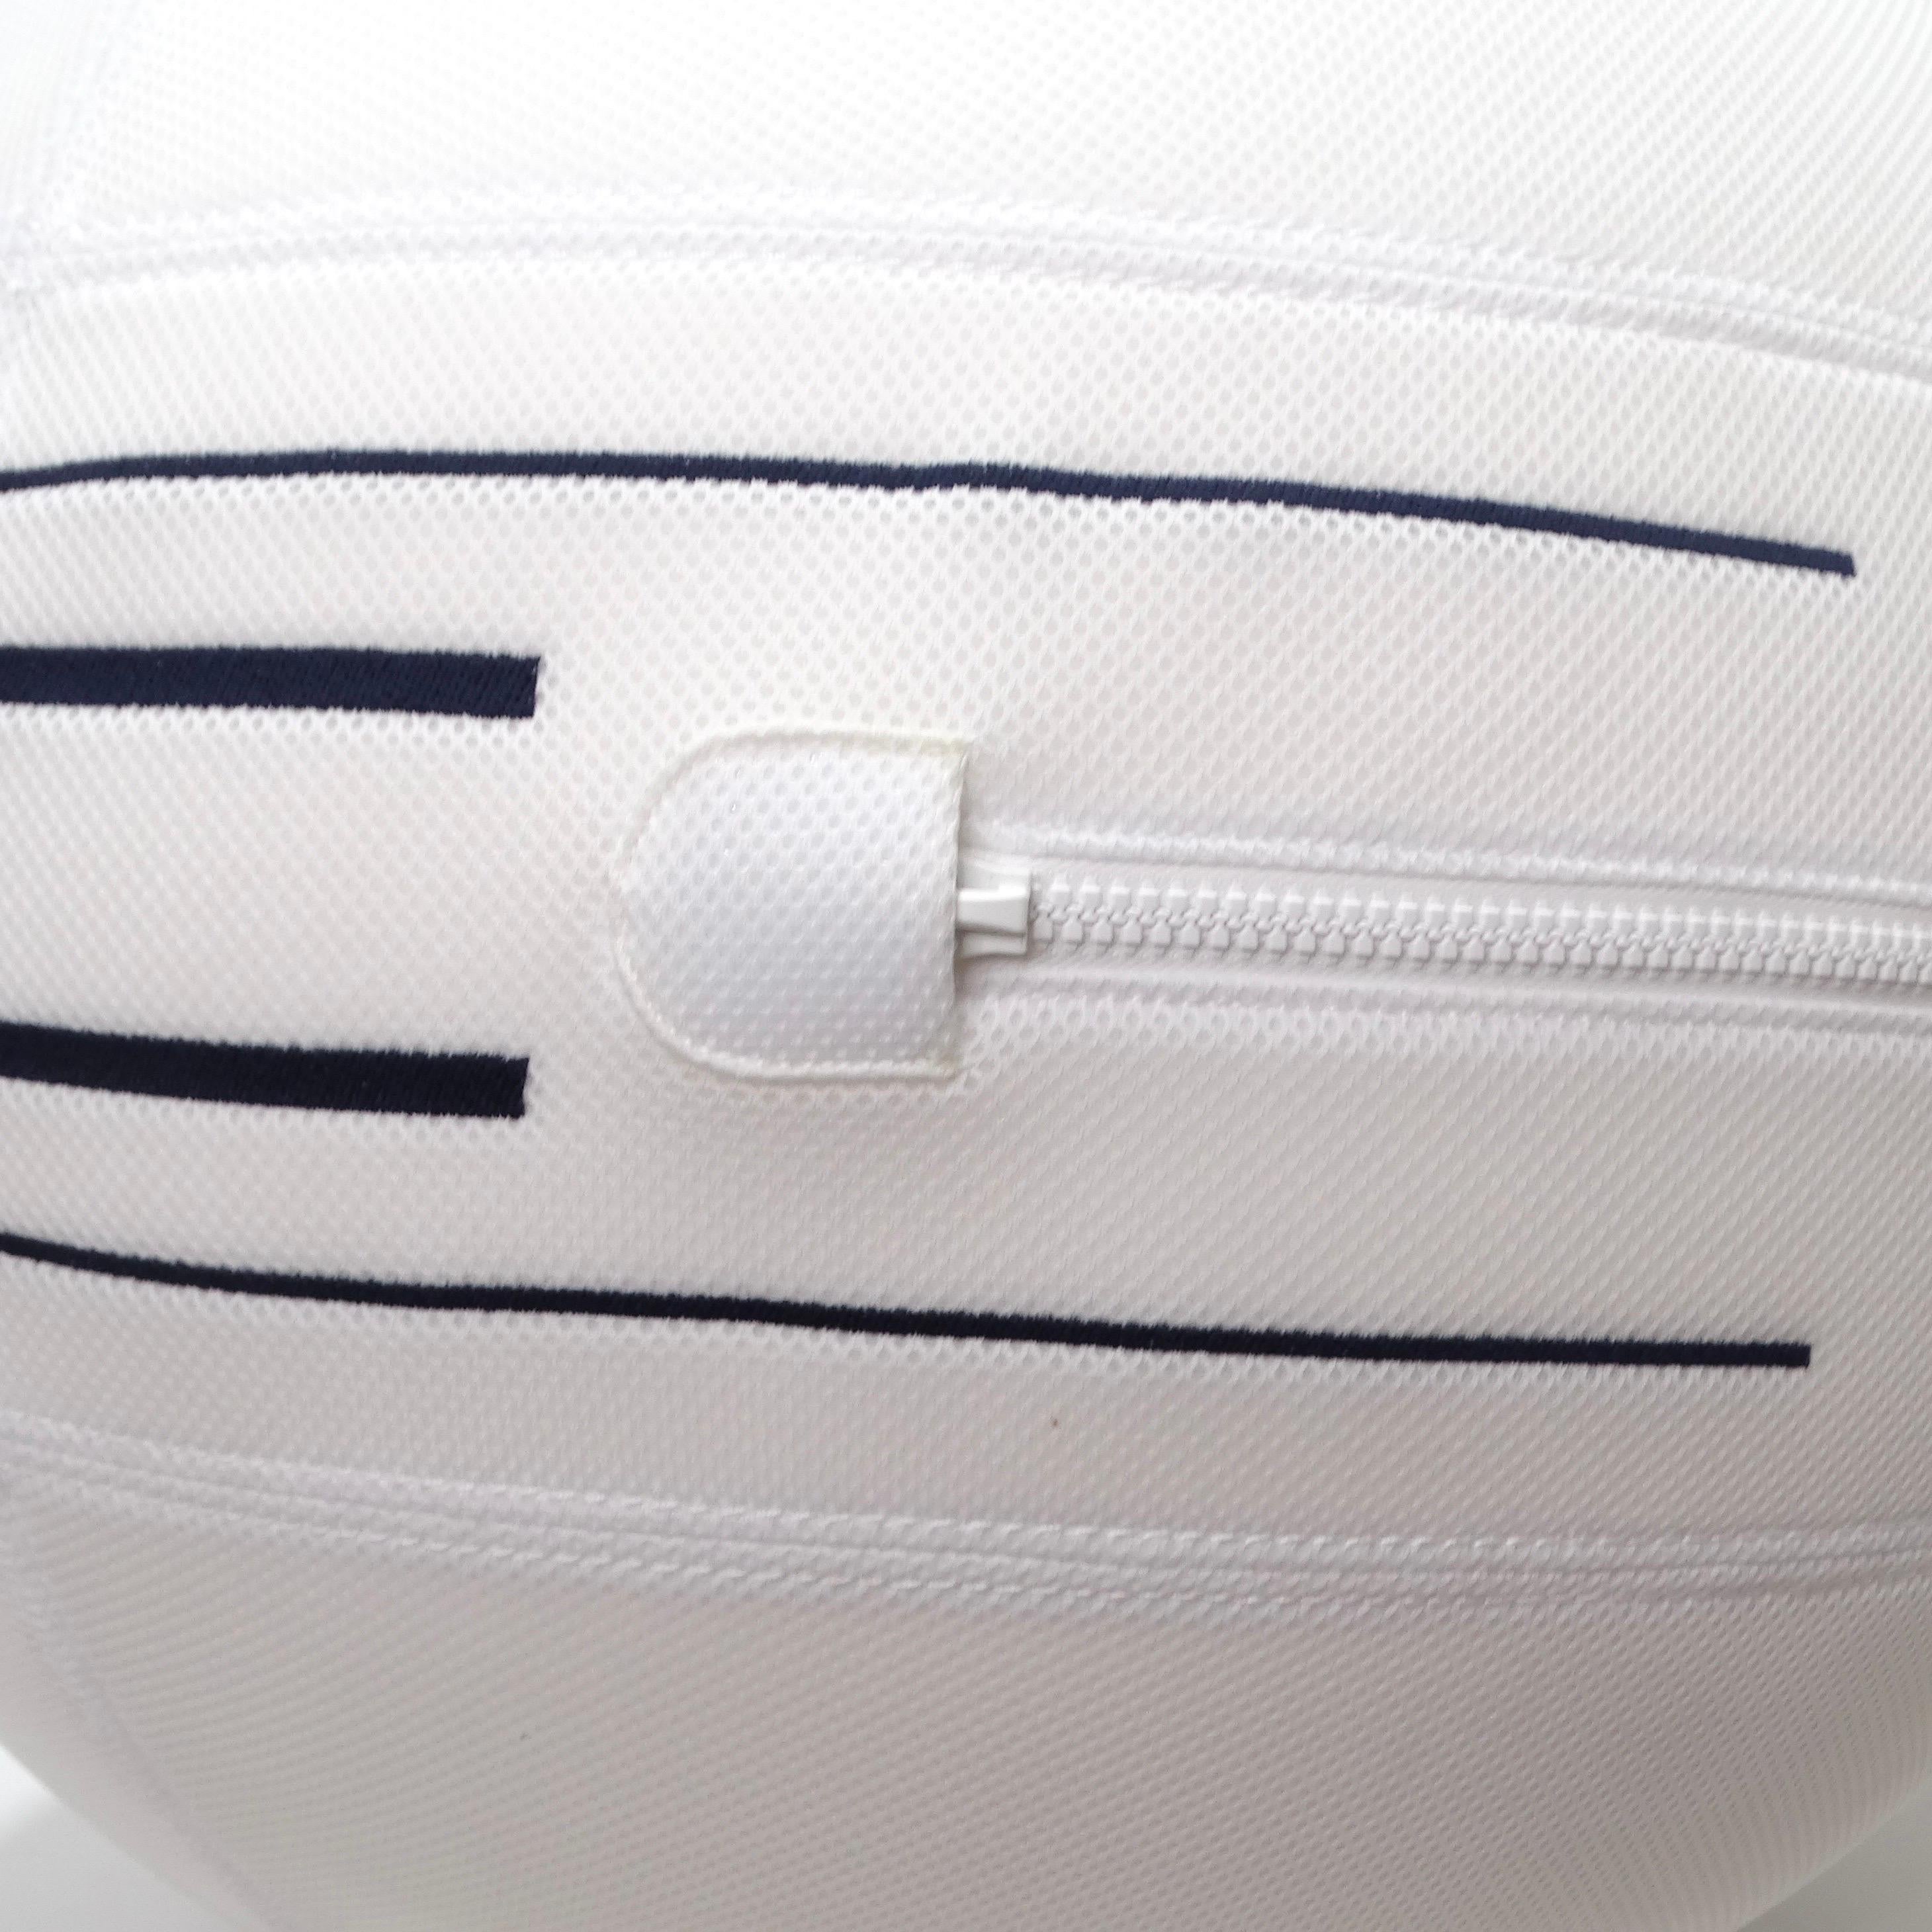 Christian Dior Limited Edition Medicine Ball For Sale 6